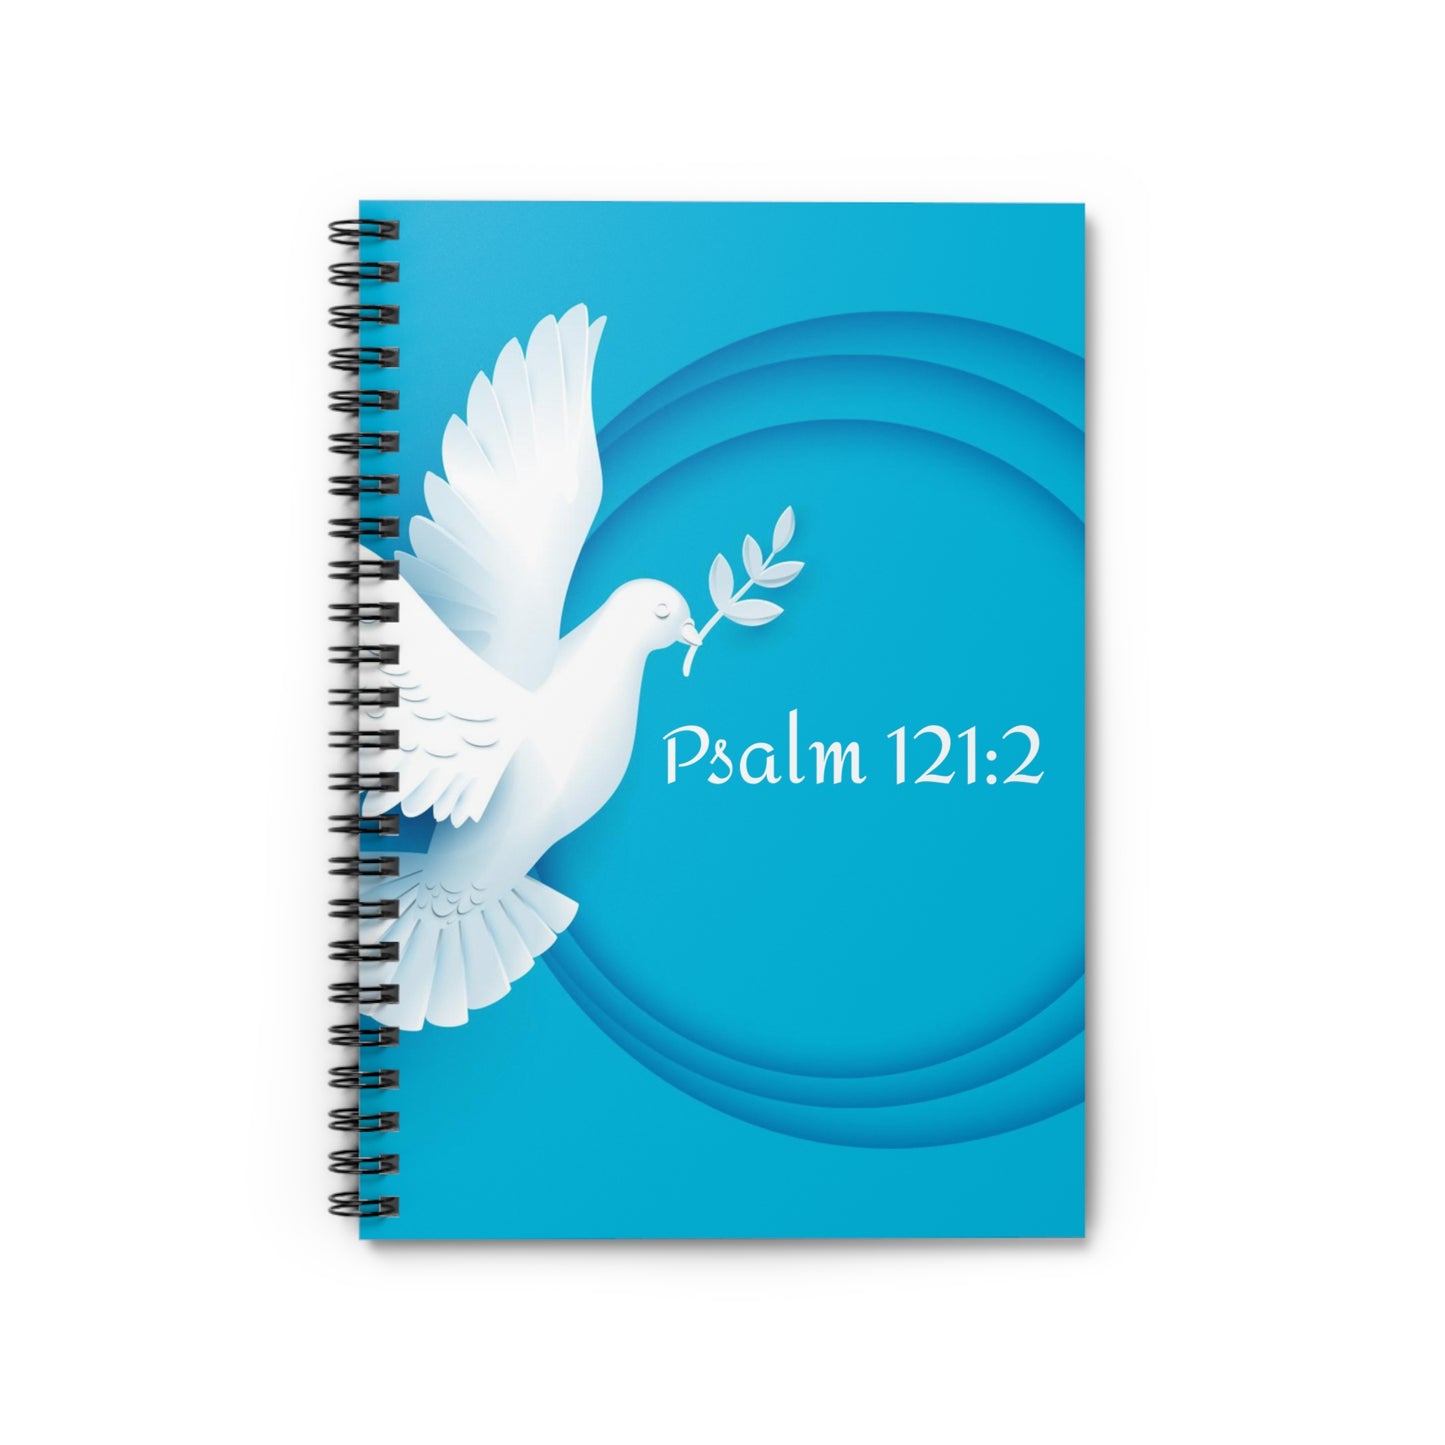 "Psalm 121:2" Spiral Notebook - Ruled Line